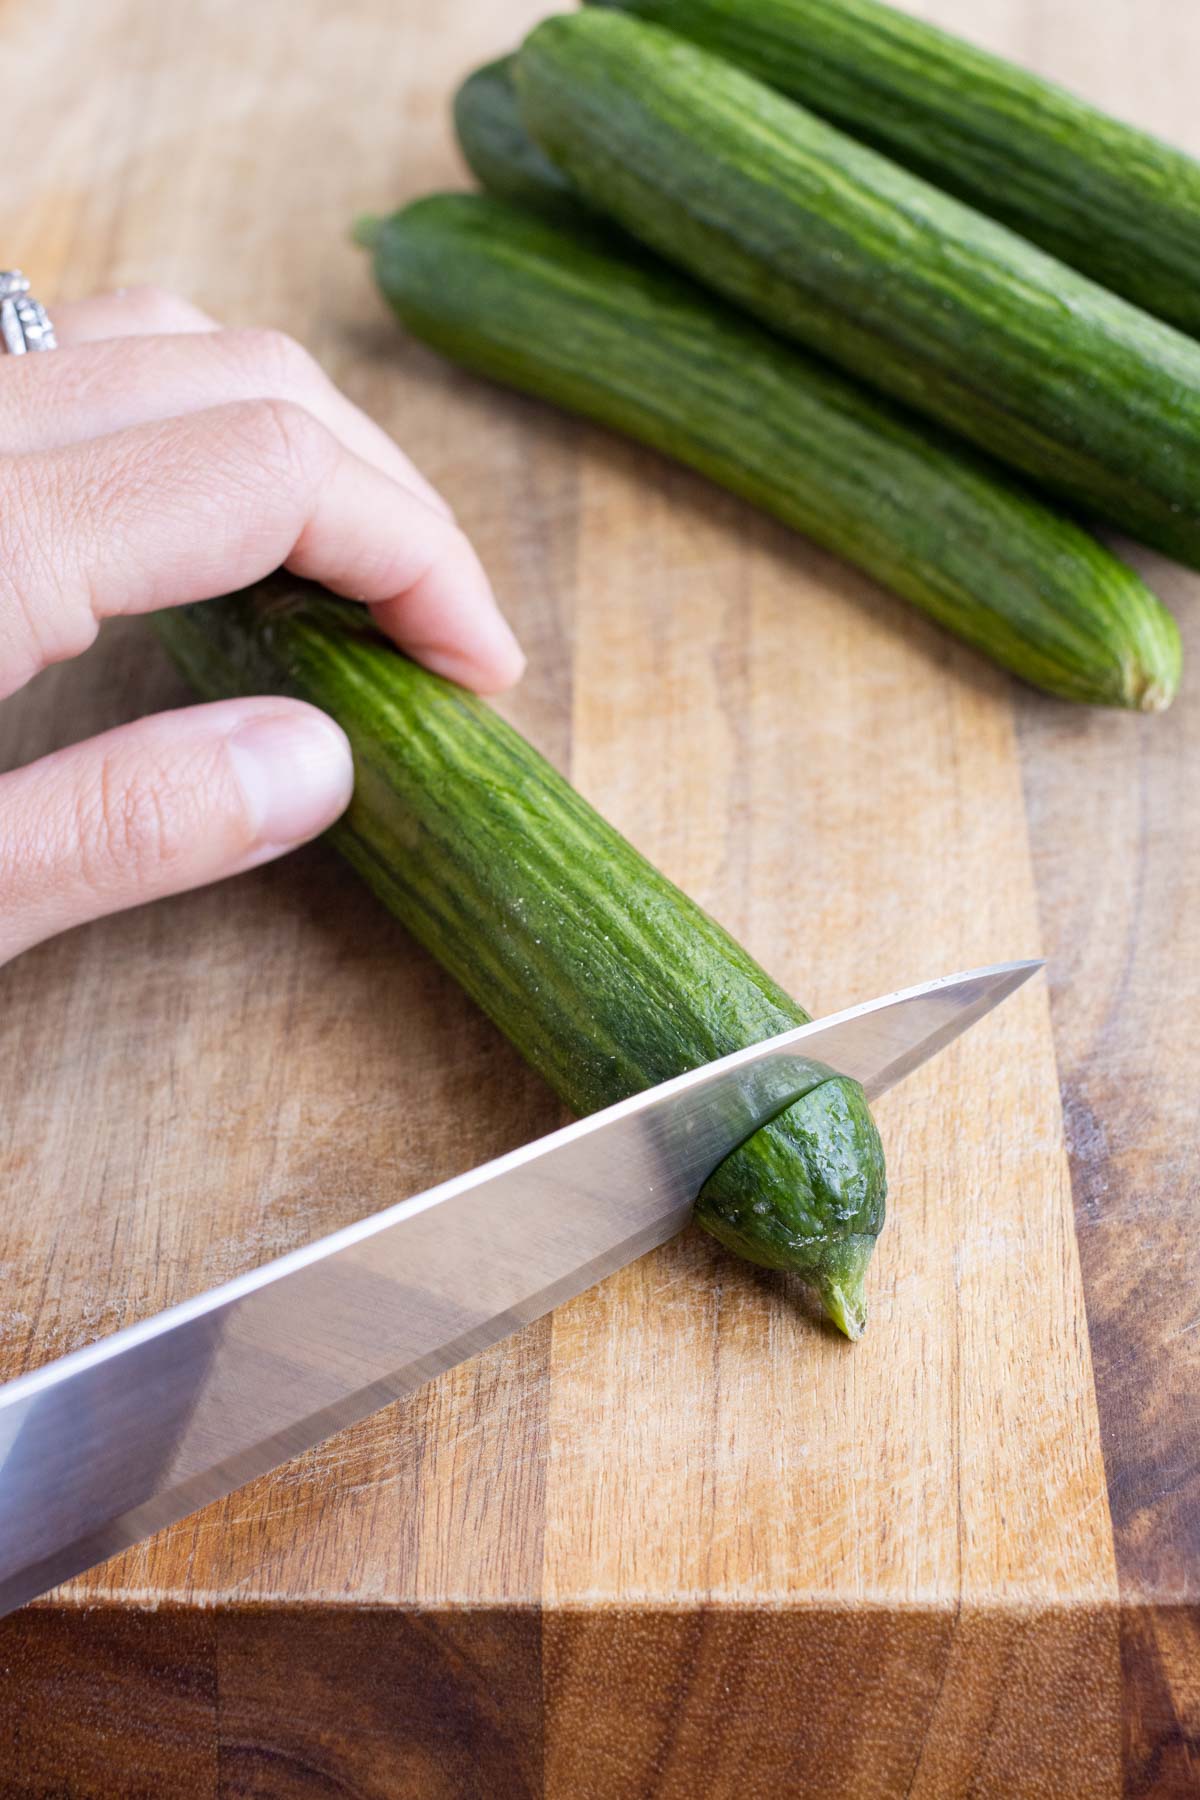 A sharp knife cuts the end off a cucumber on a wooden cutting board.